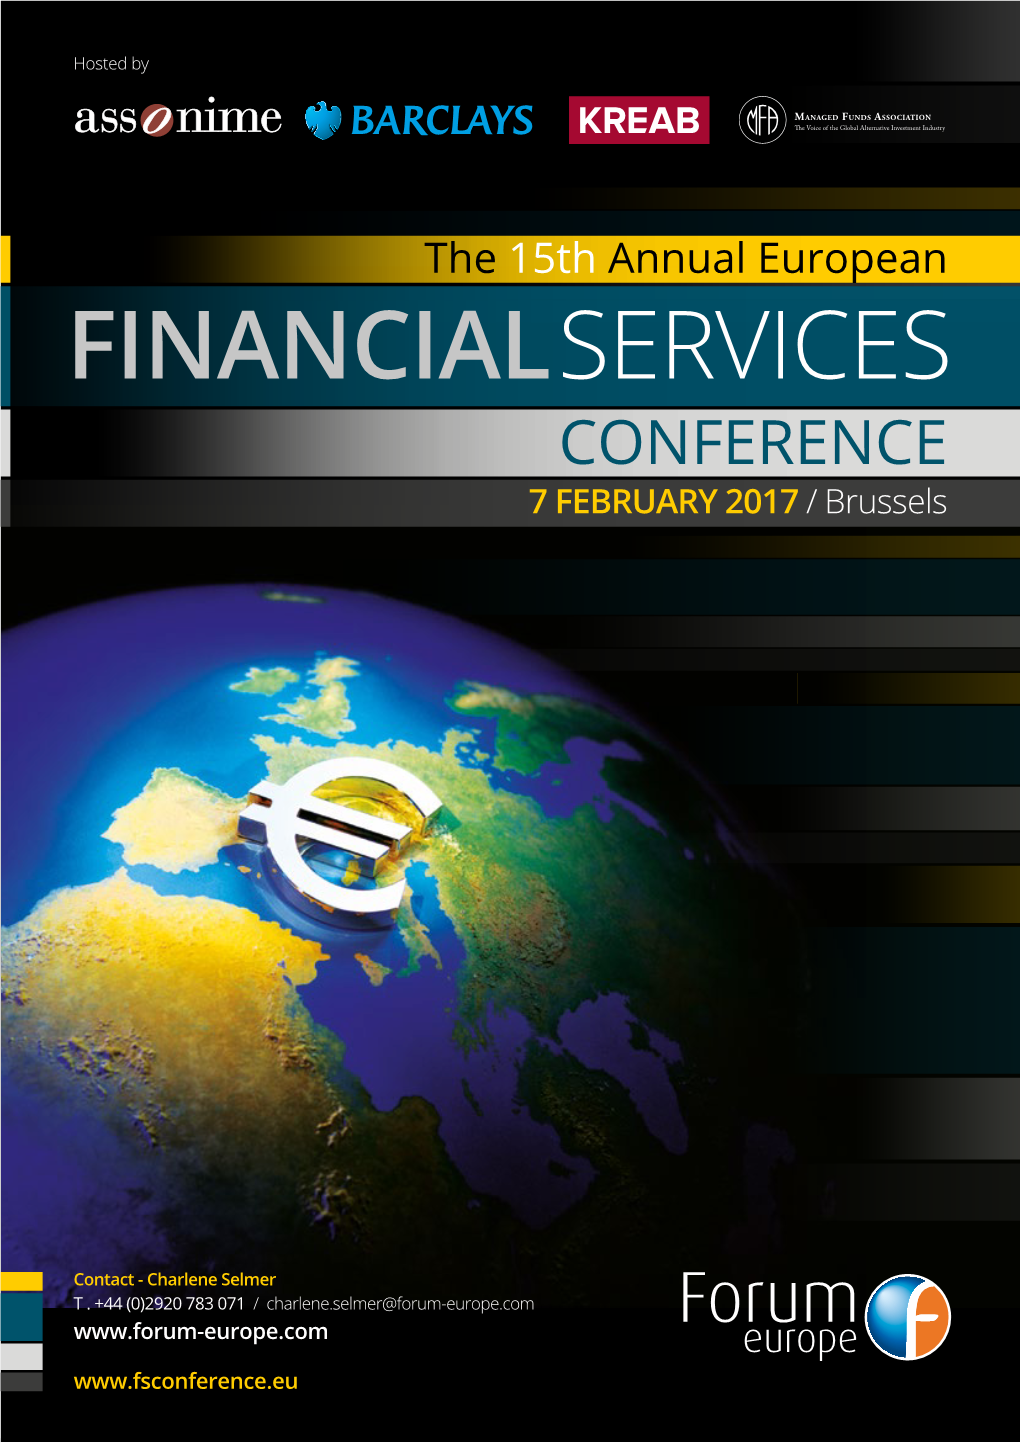 FINANCIALSERVICES CONFERENCE 7 FEBRUARY 2017 / Brussels